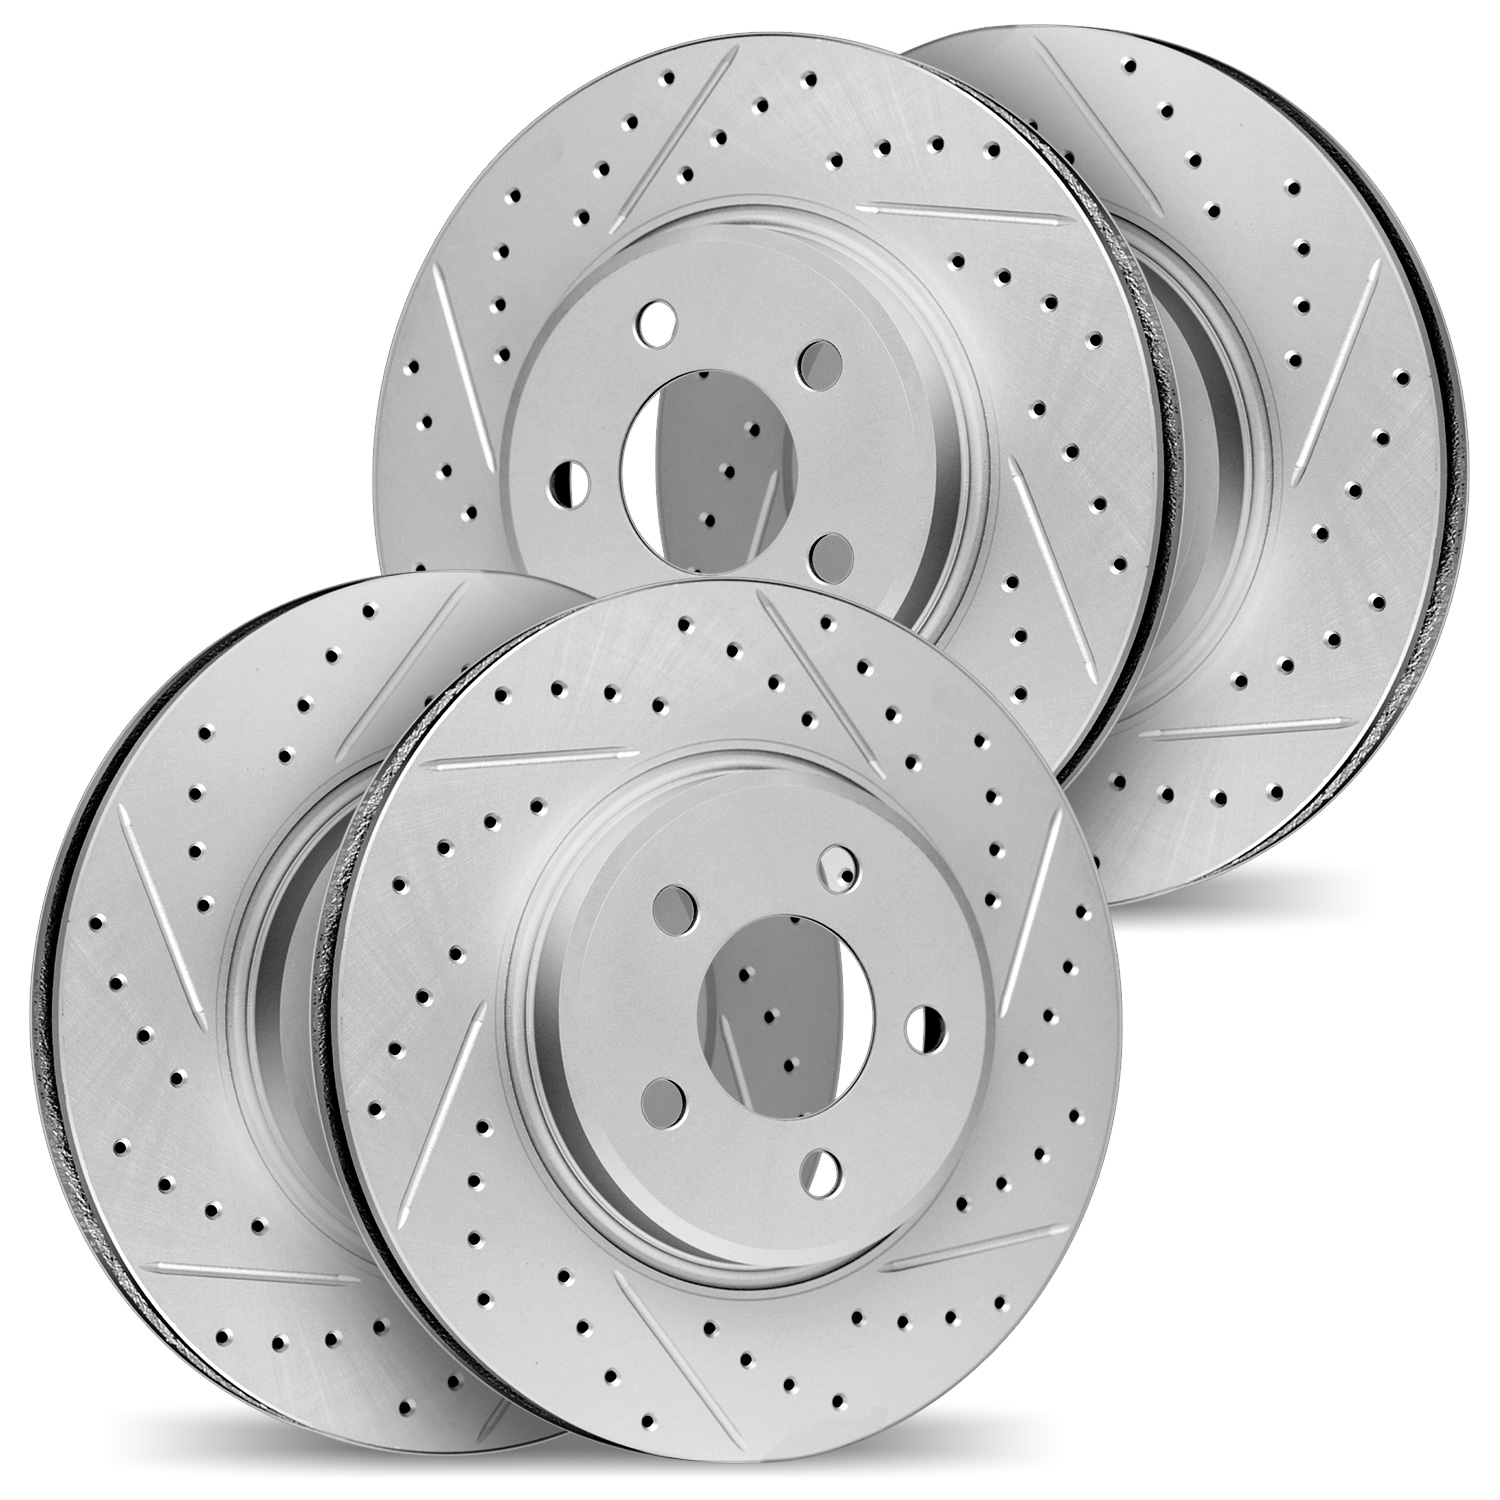 2004-63039 Geoperformance Drilled/Slotted Brake Rotors, 2013-2019 Mercedes-Benz, Position: Front and Rear